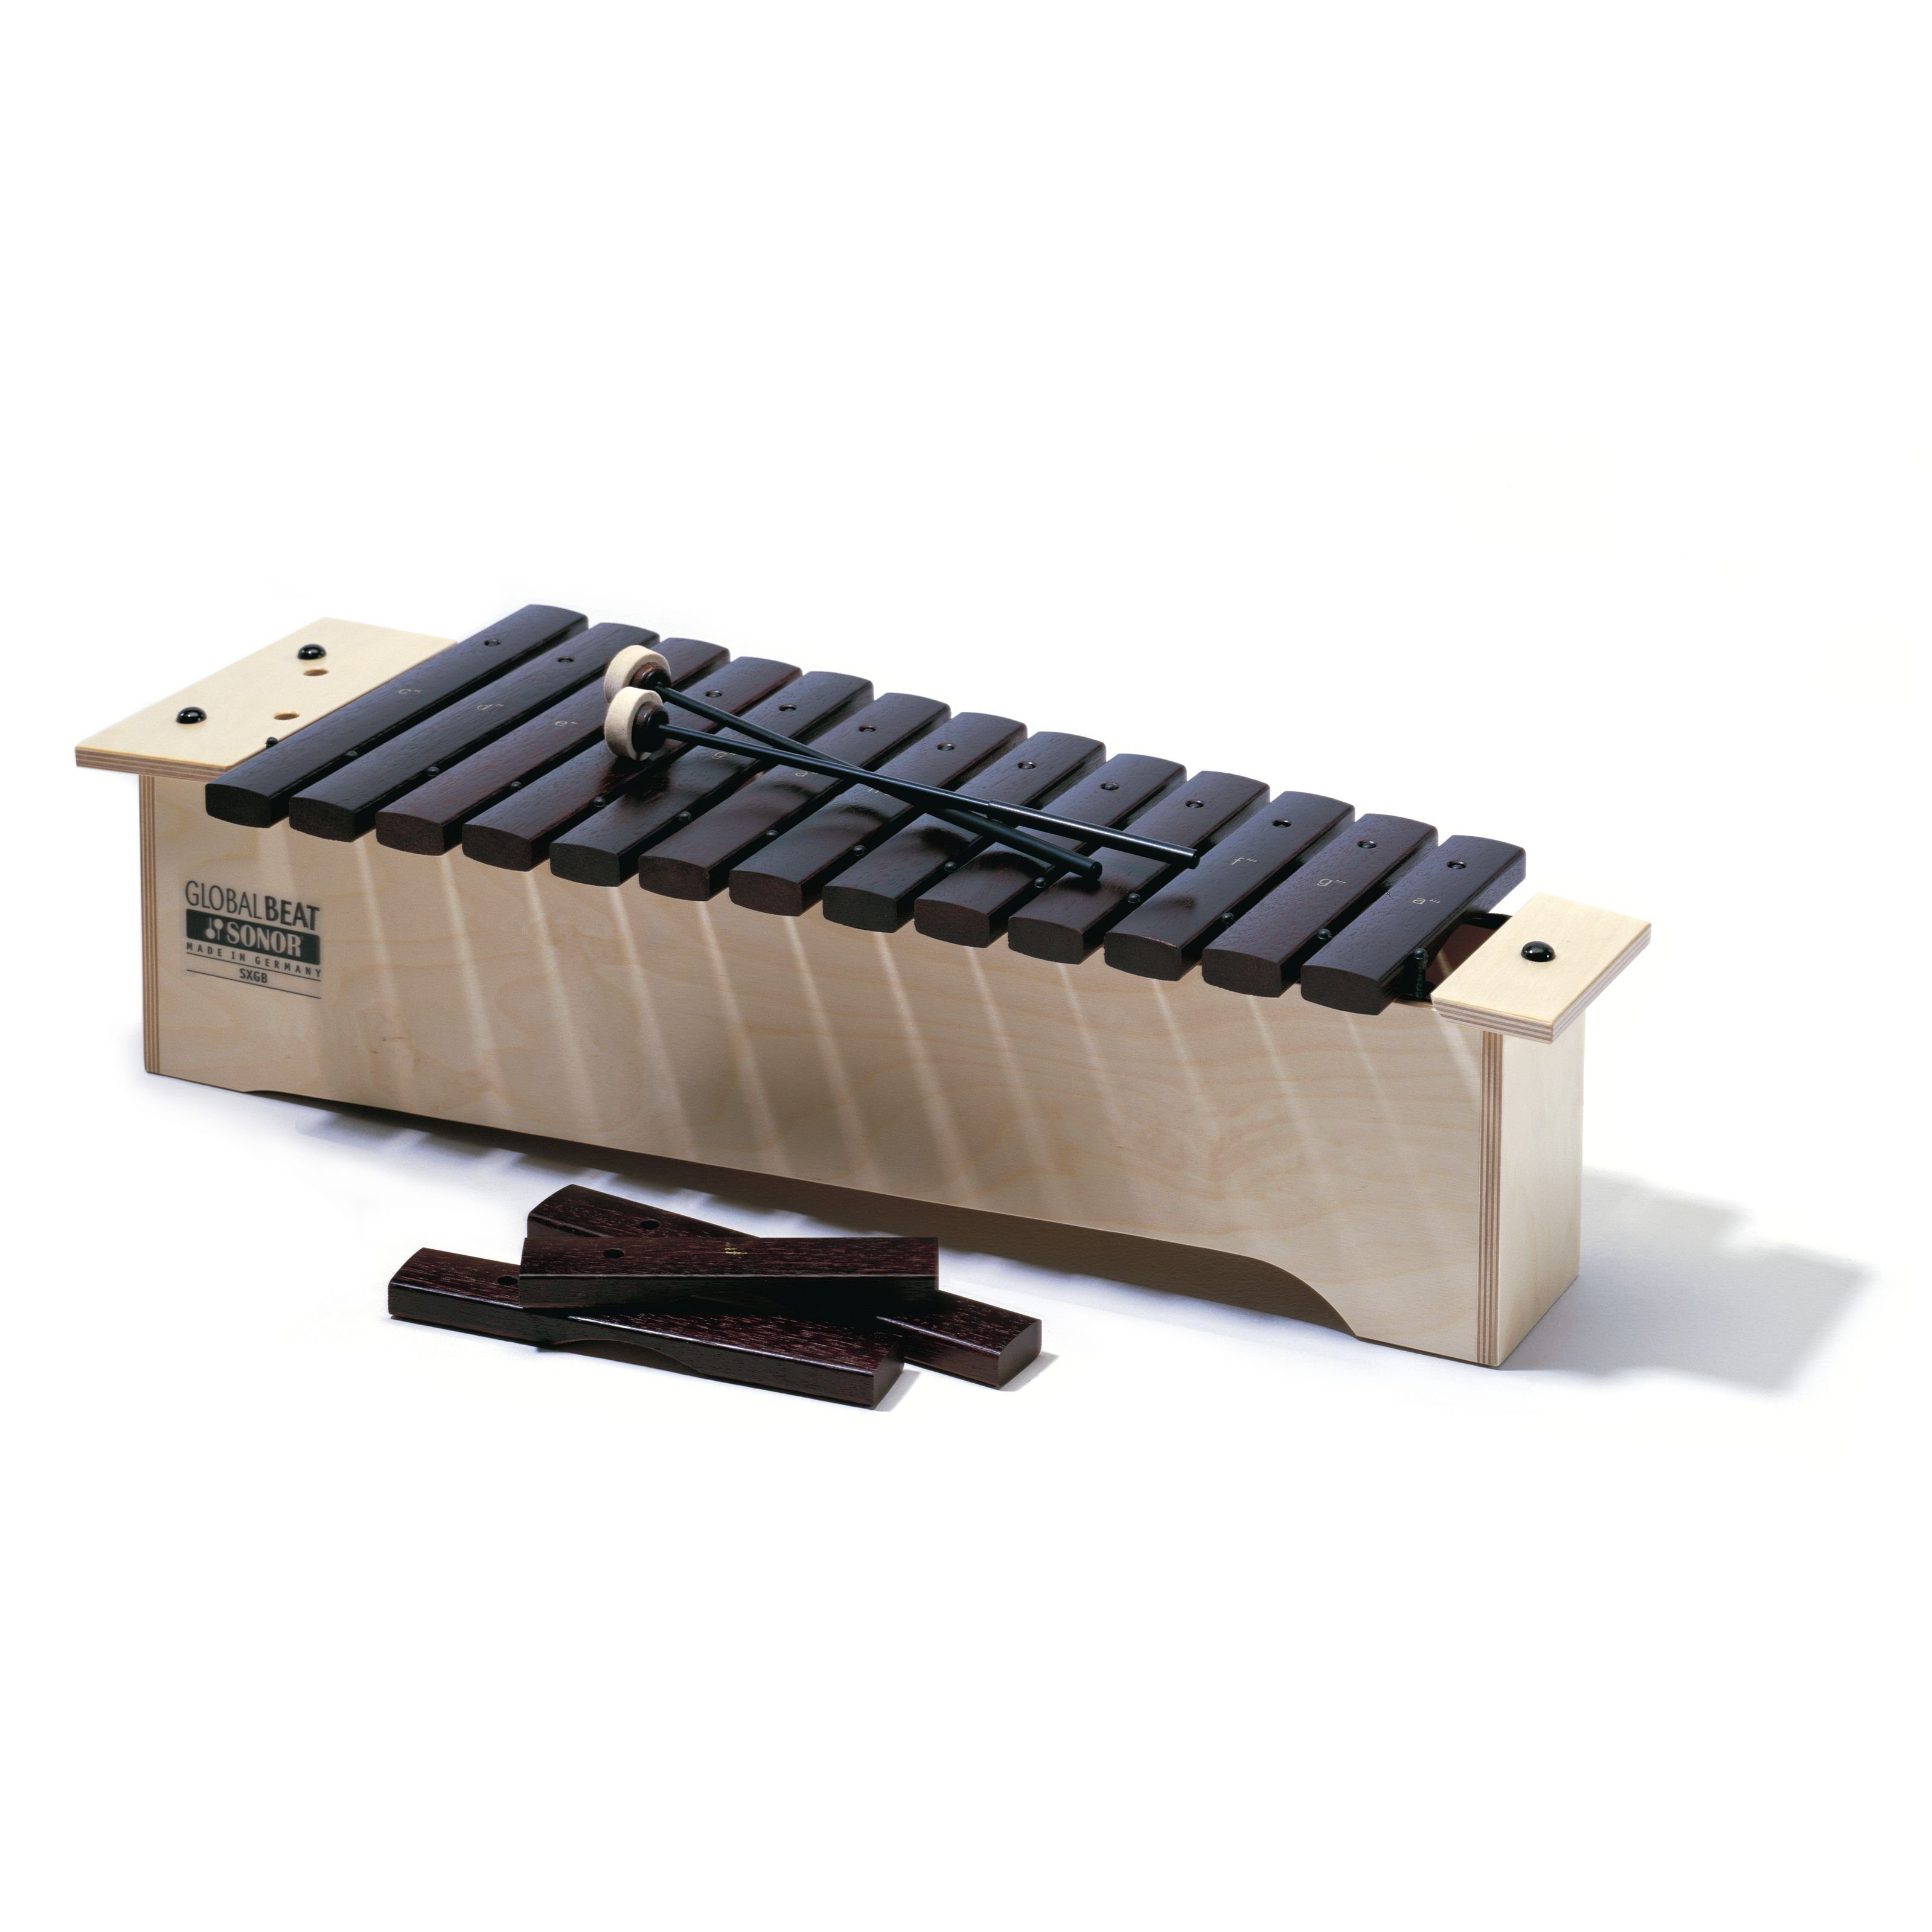 SONOR Xylophon,SX GB Xylophon Global Beat Sopran, Percussion, Orff Instrumente, SX GB Xylophon Global Beat Sopran - Orff instrument